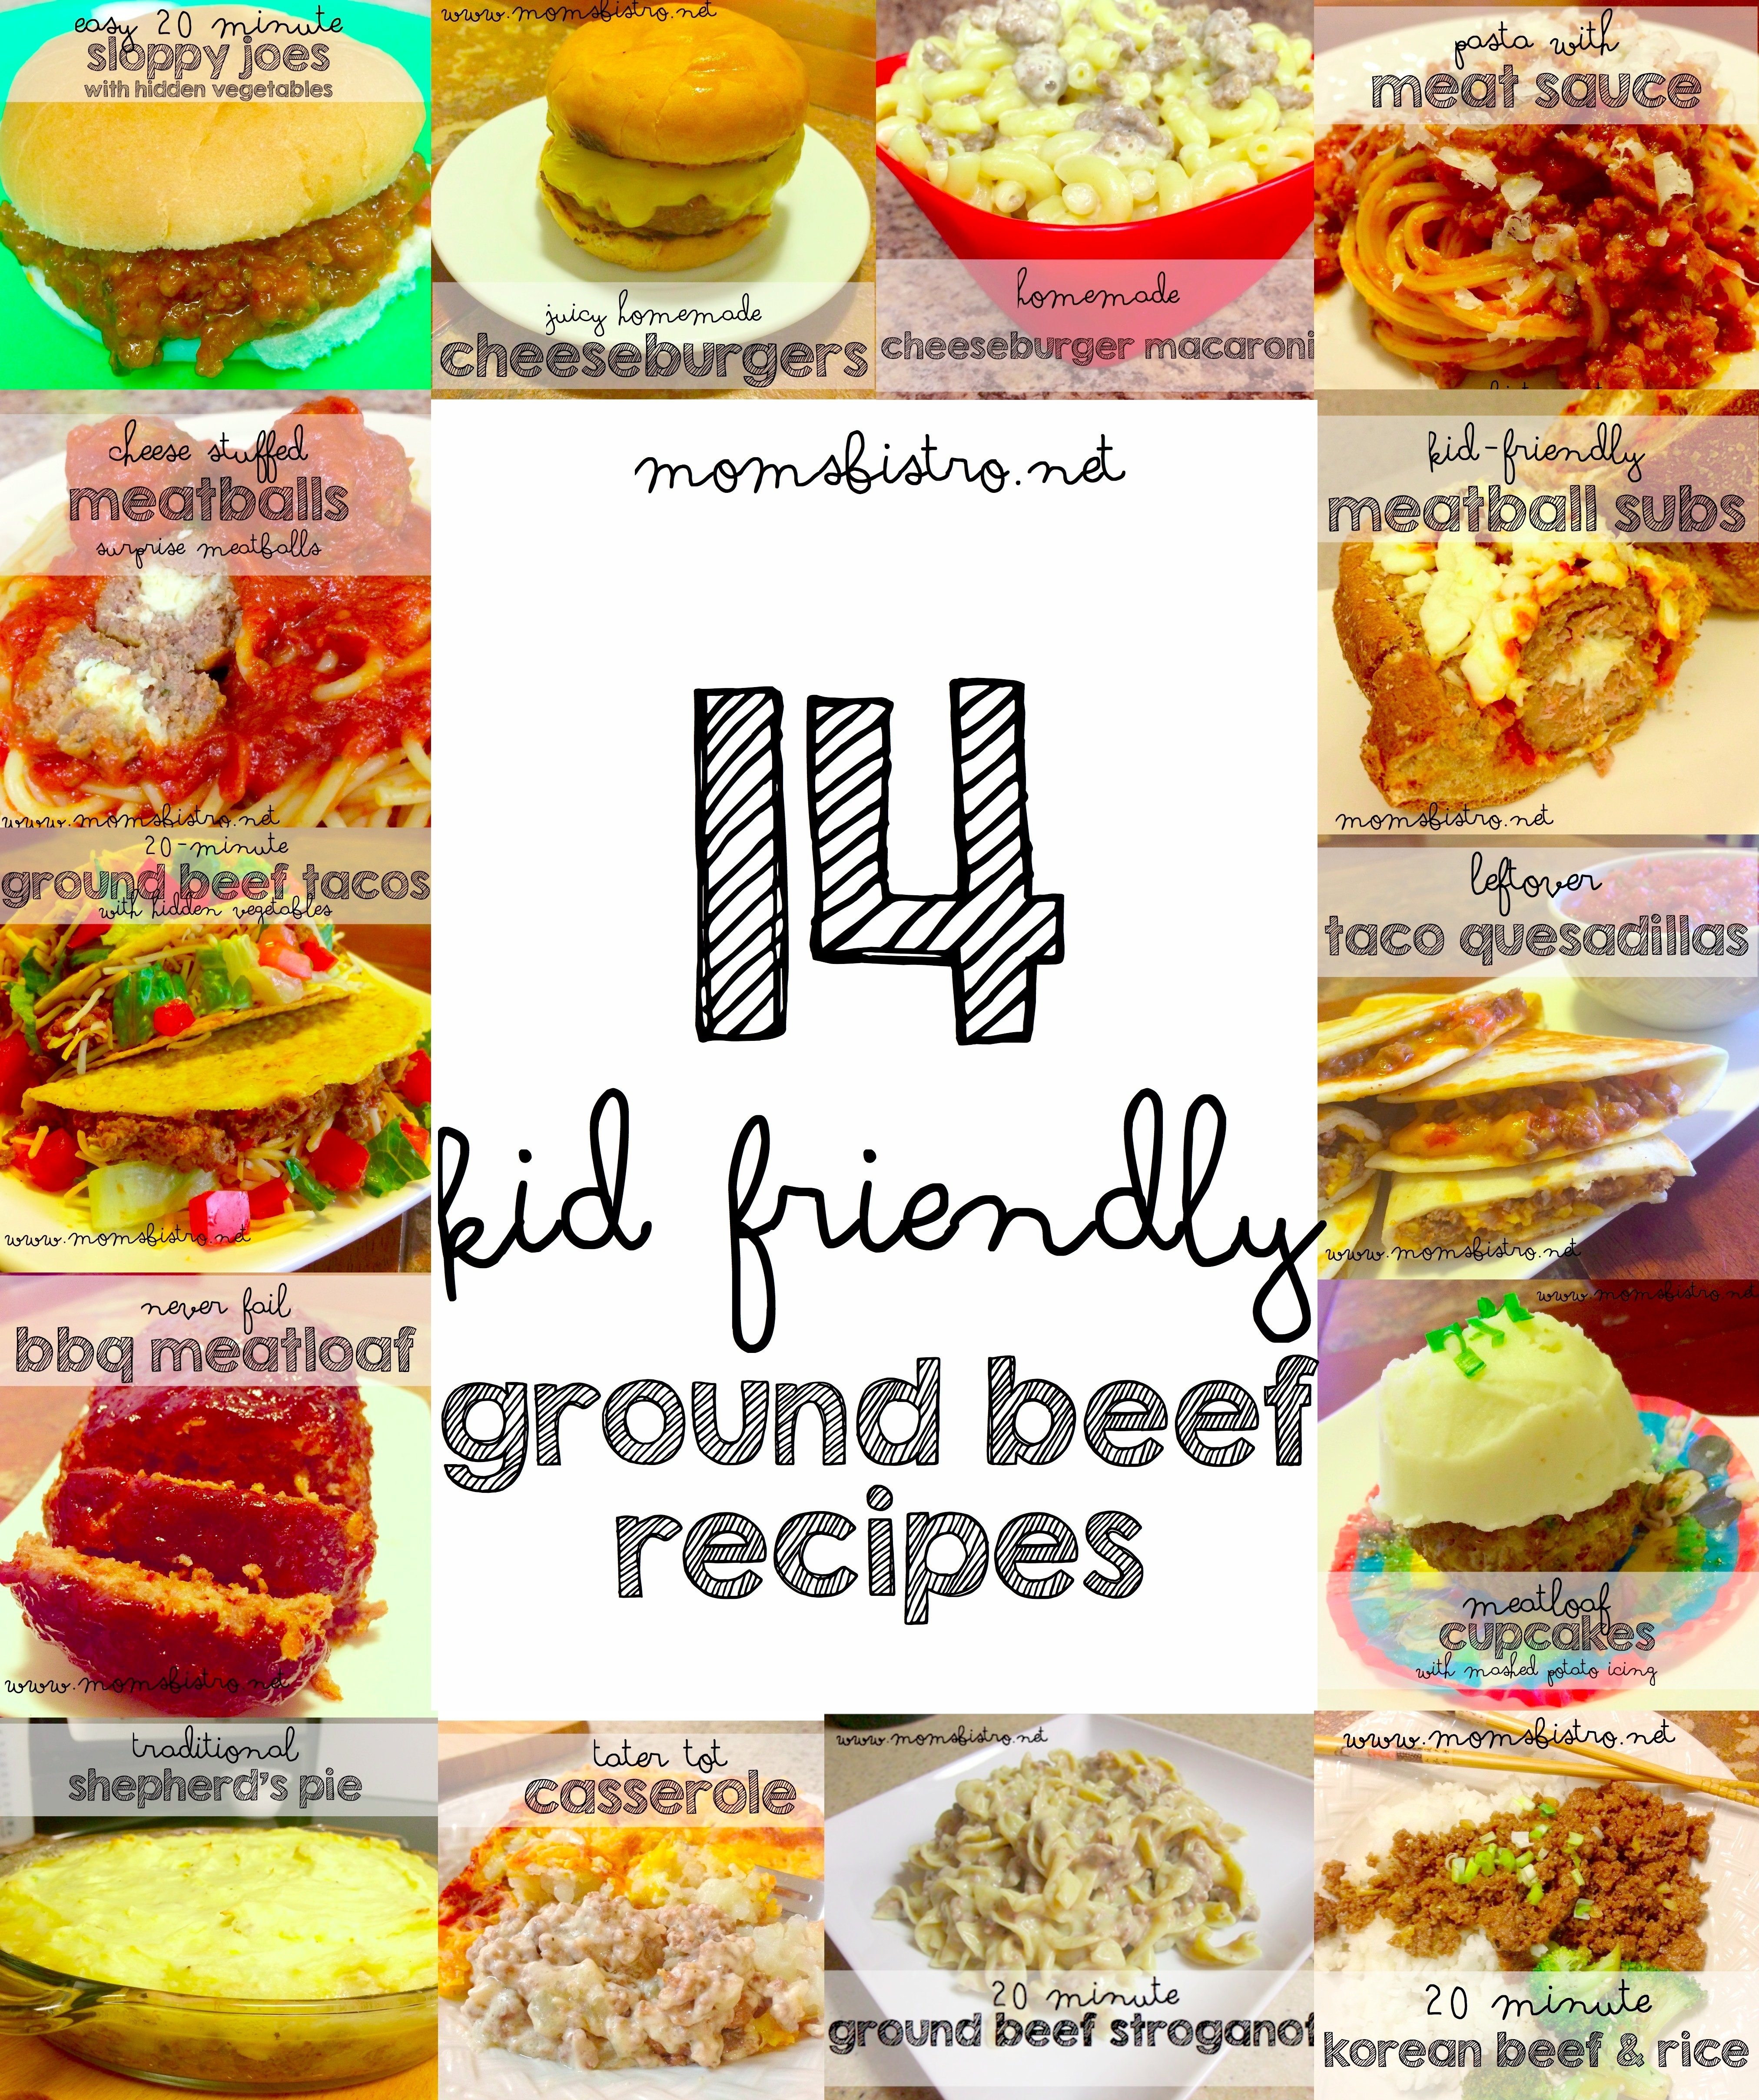 10 Wonderful Food Ideas For Dinner Tonight 14 easy kid friendly ground beef recipes to try for dinner tonight 16 2022